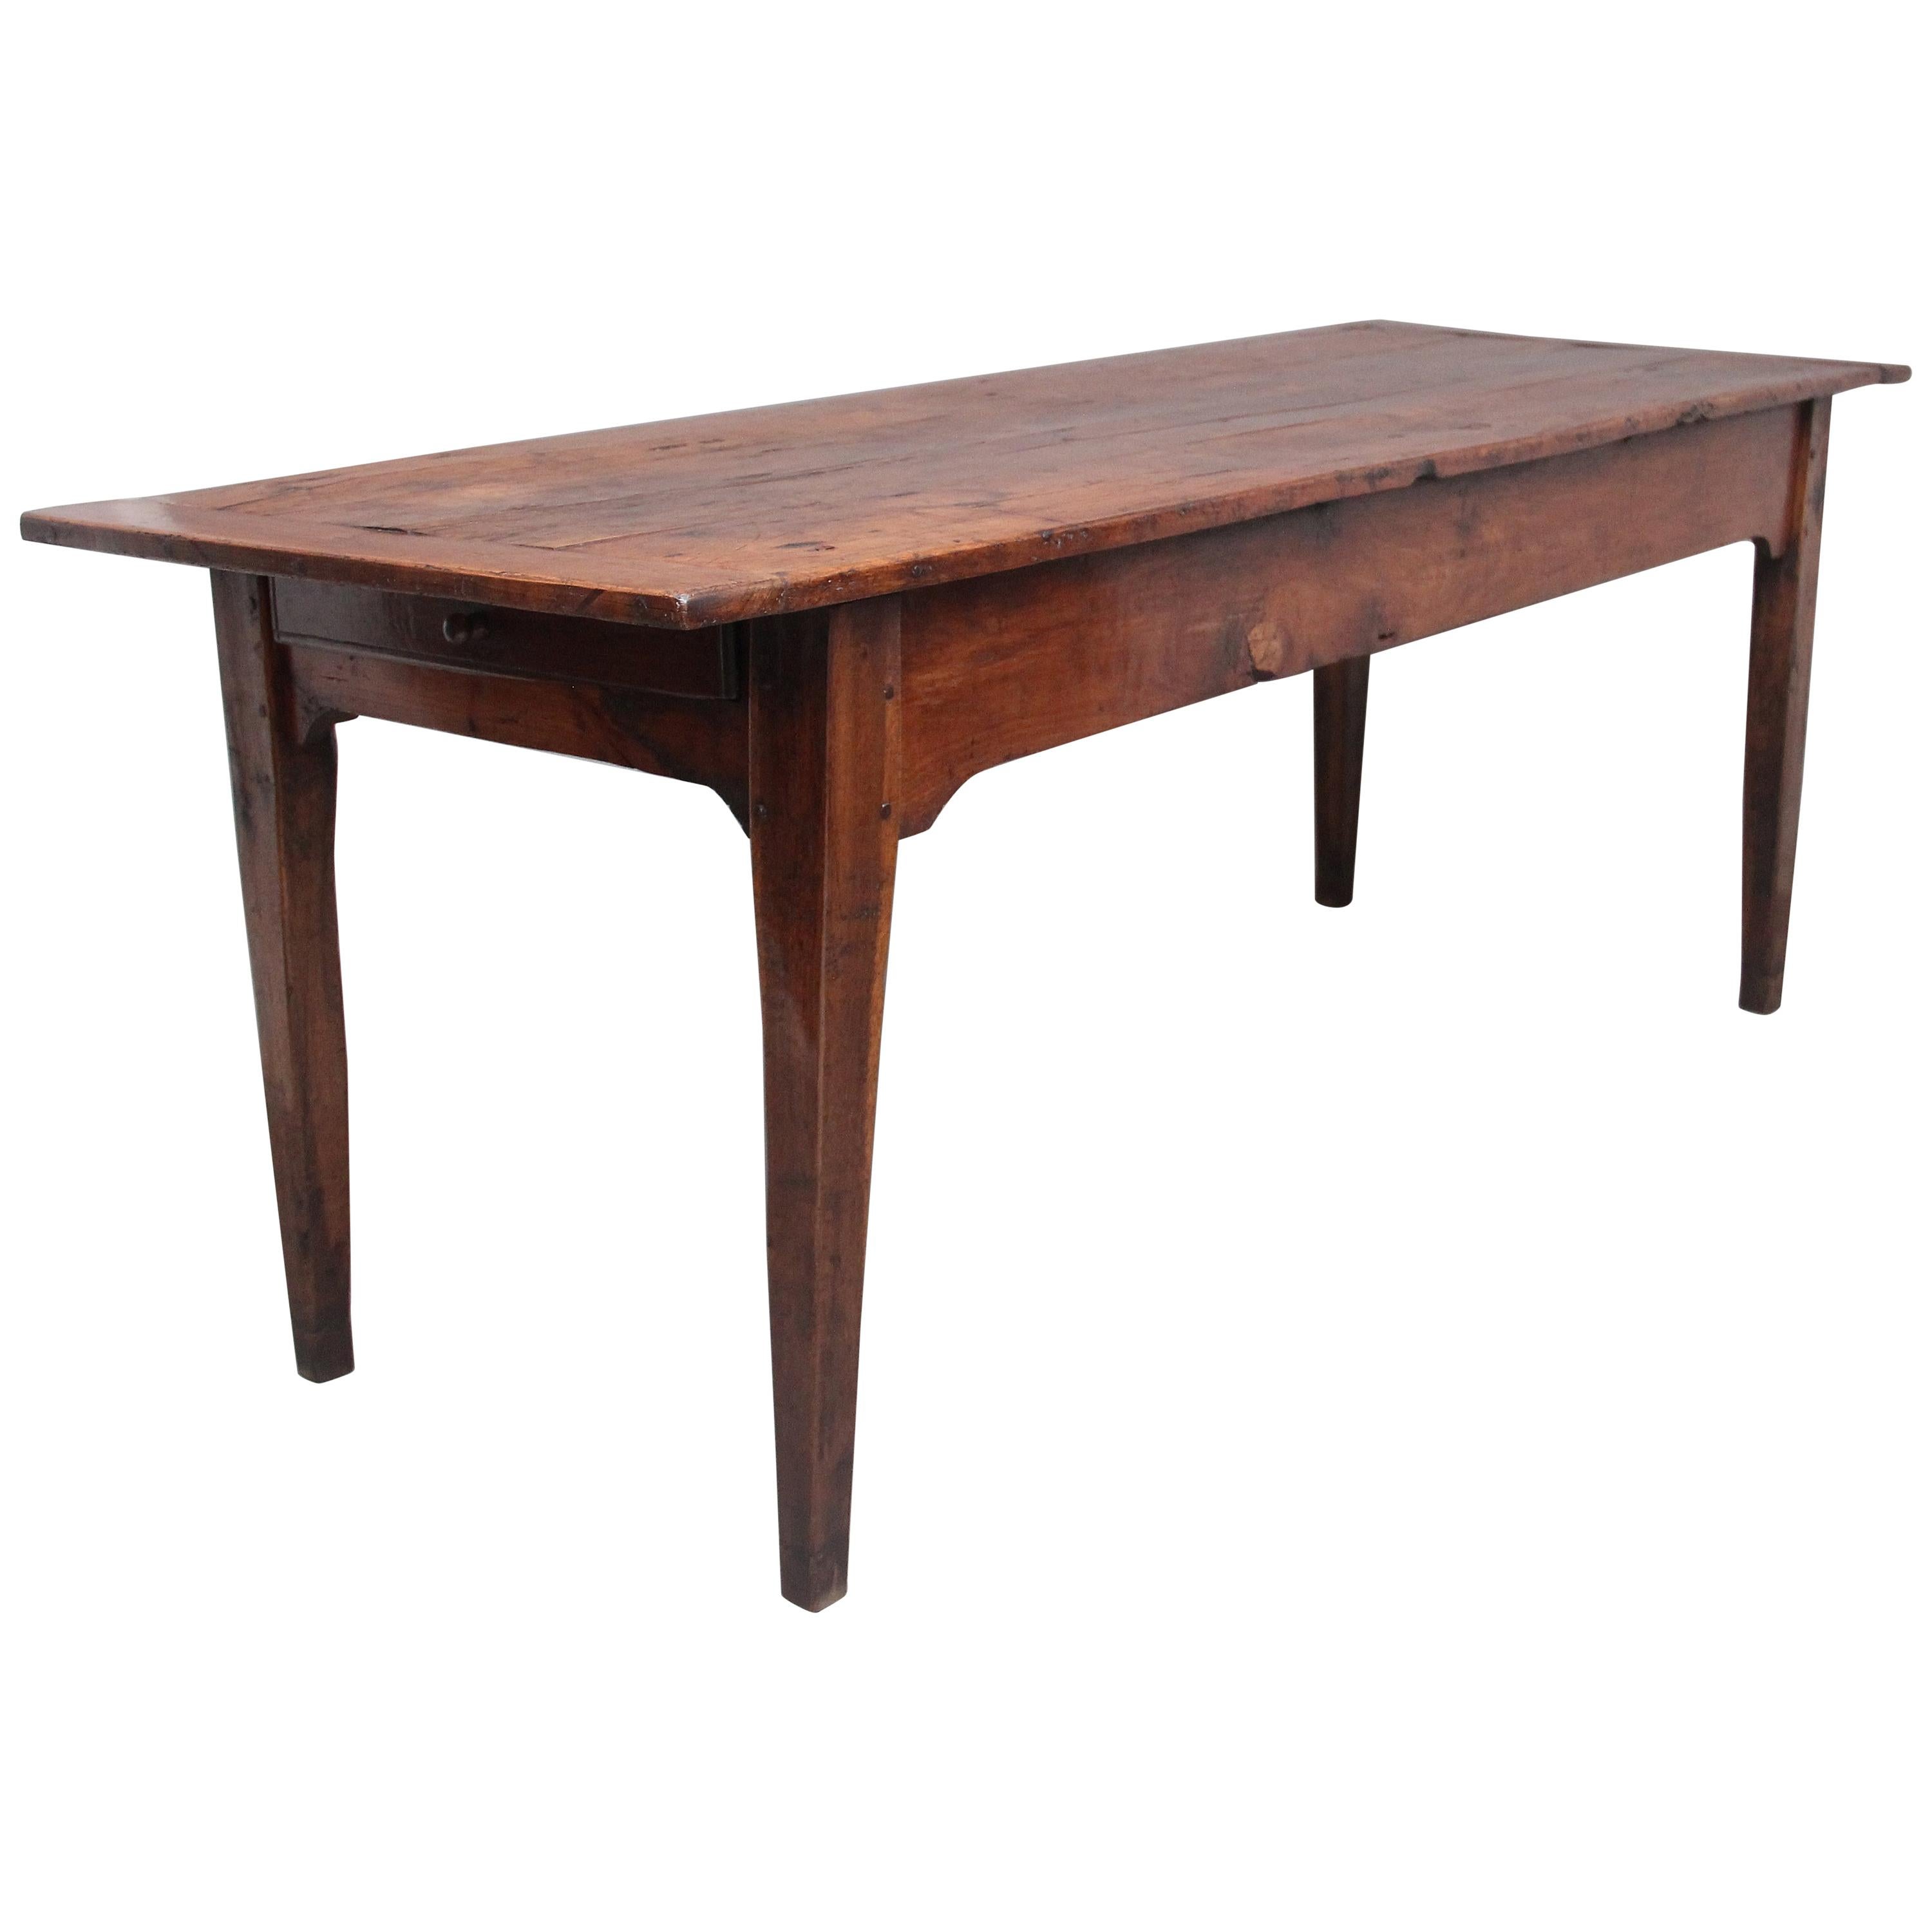 Early 19th Century Rustic Fruitwood Farmhouse Table